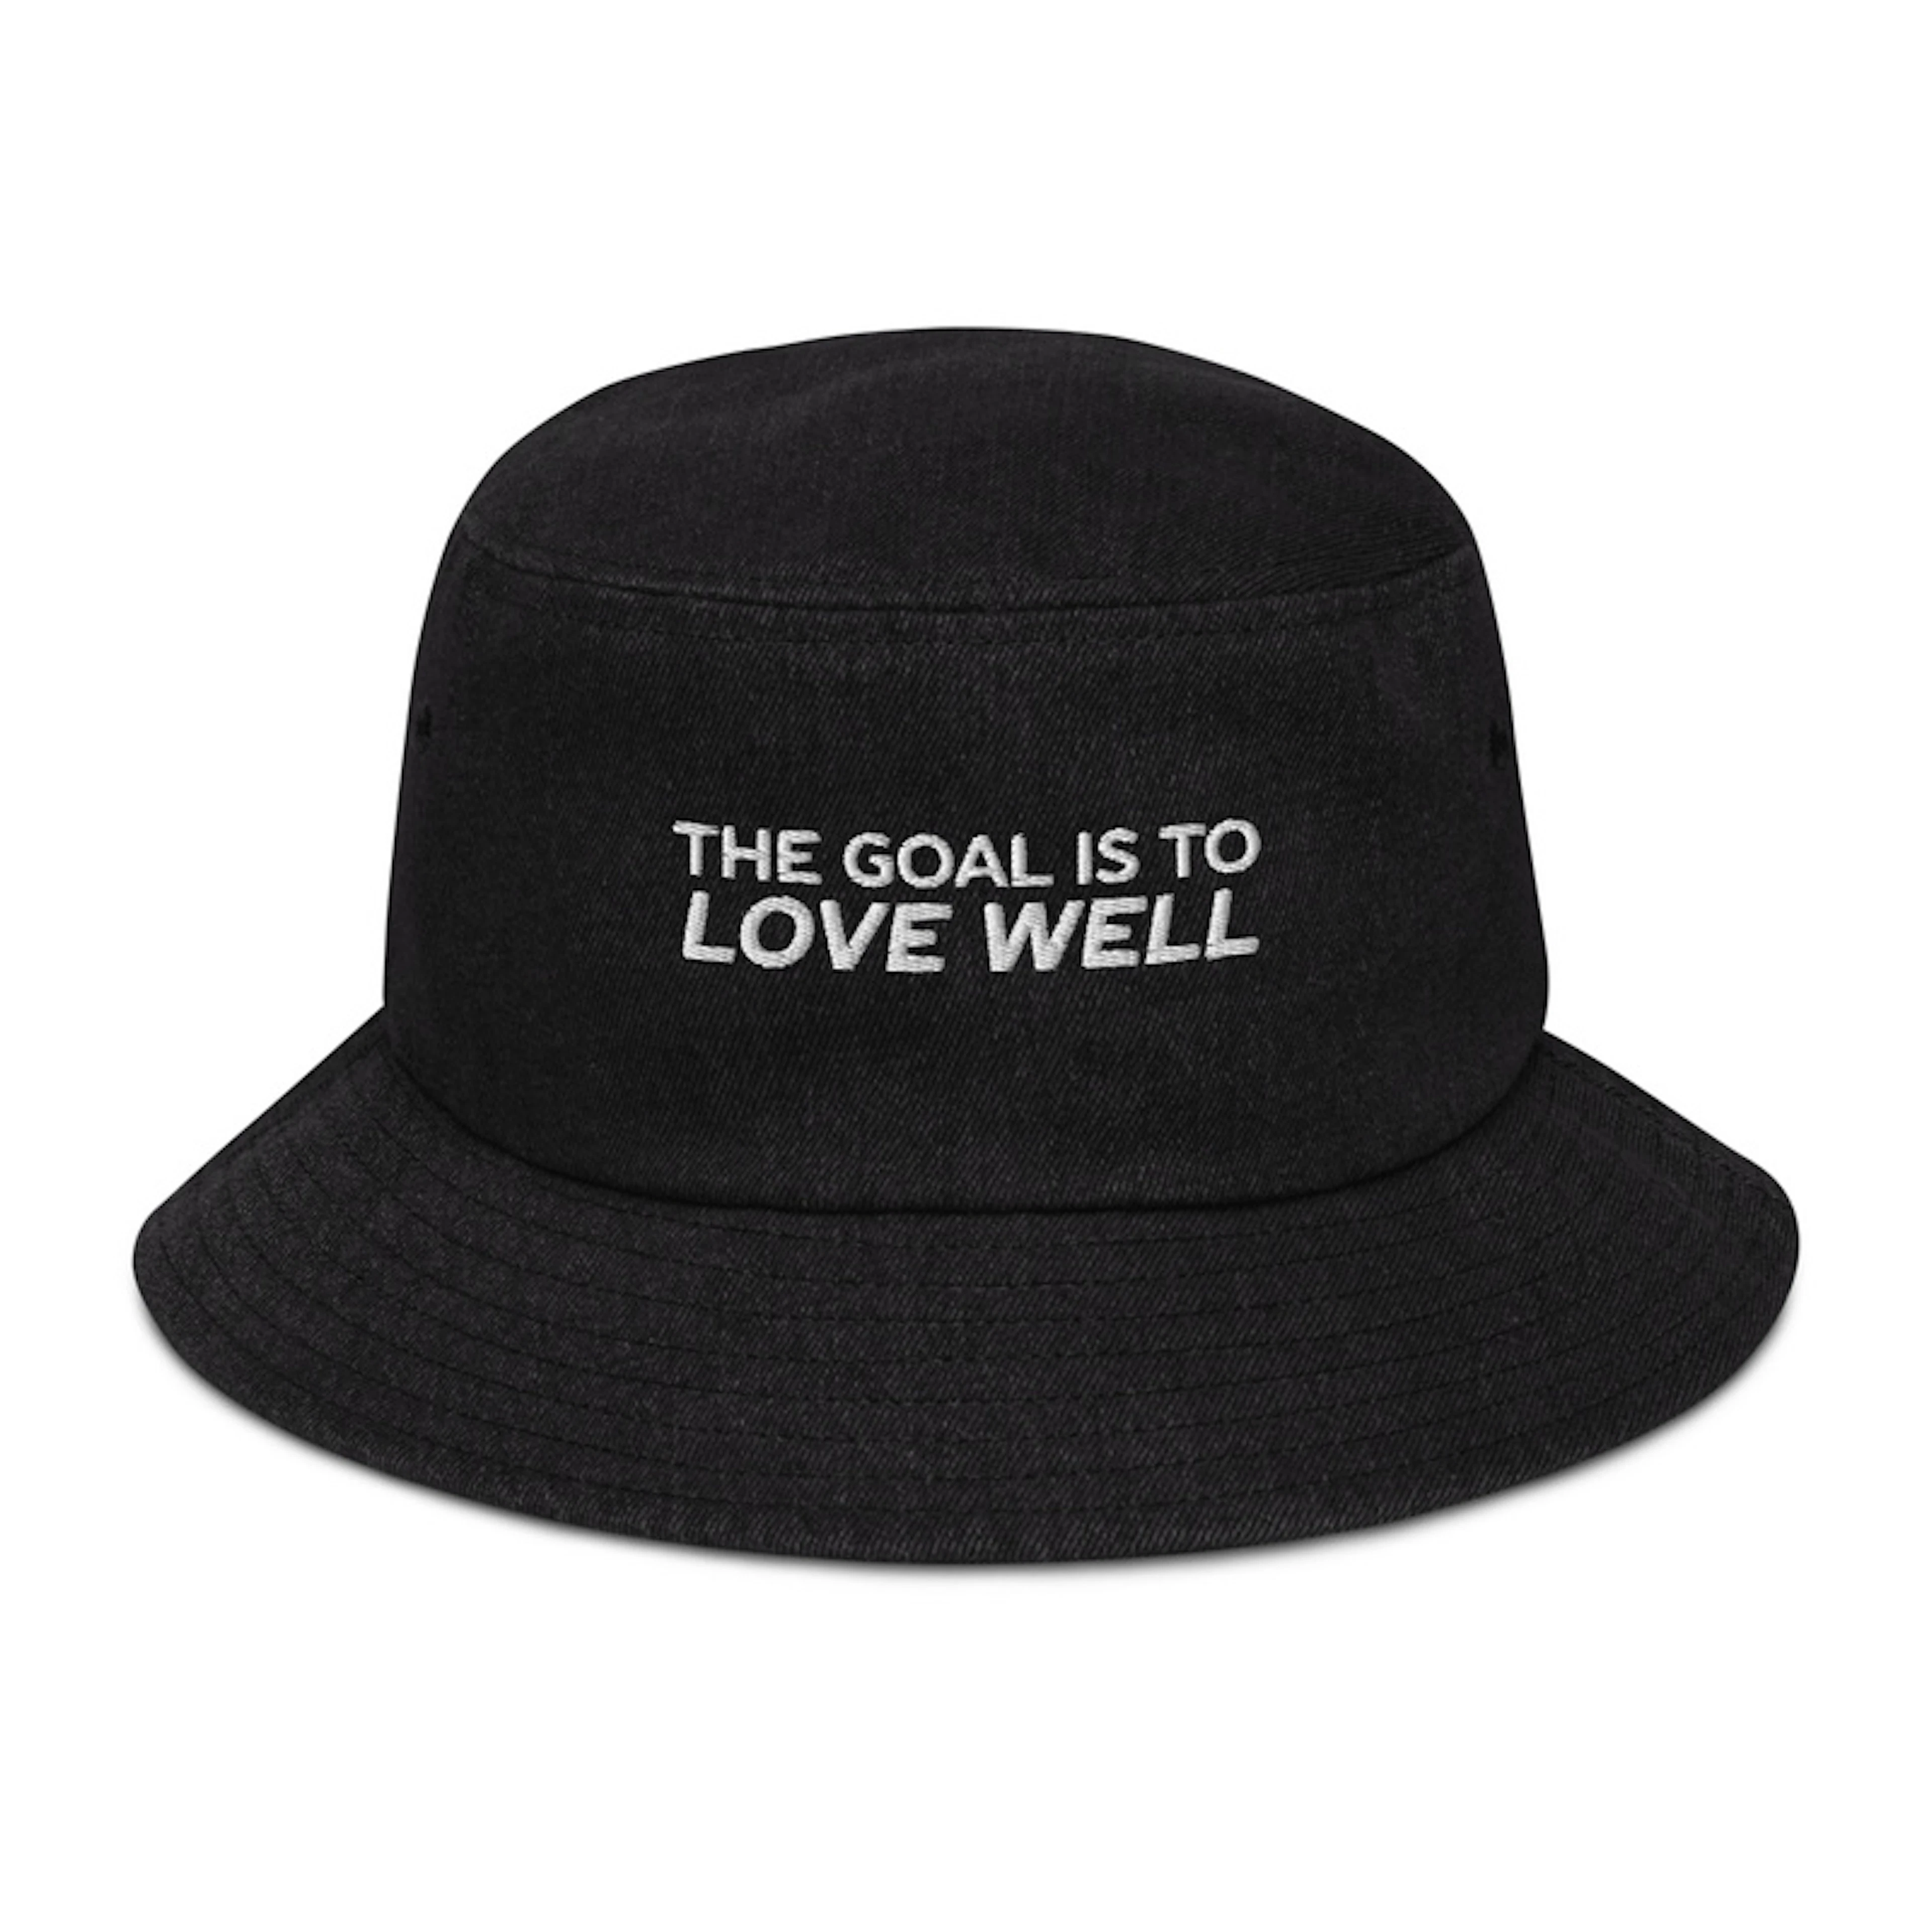 The Goal is to Love Well (logo)